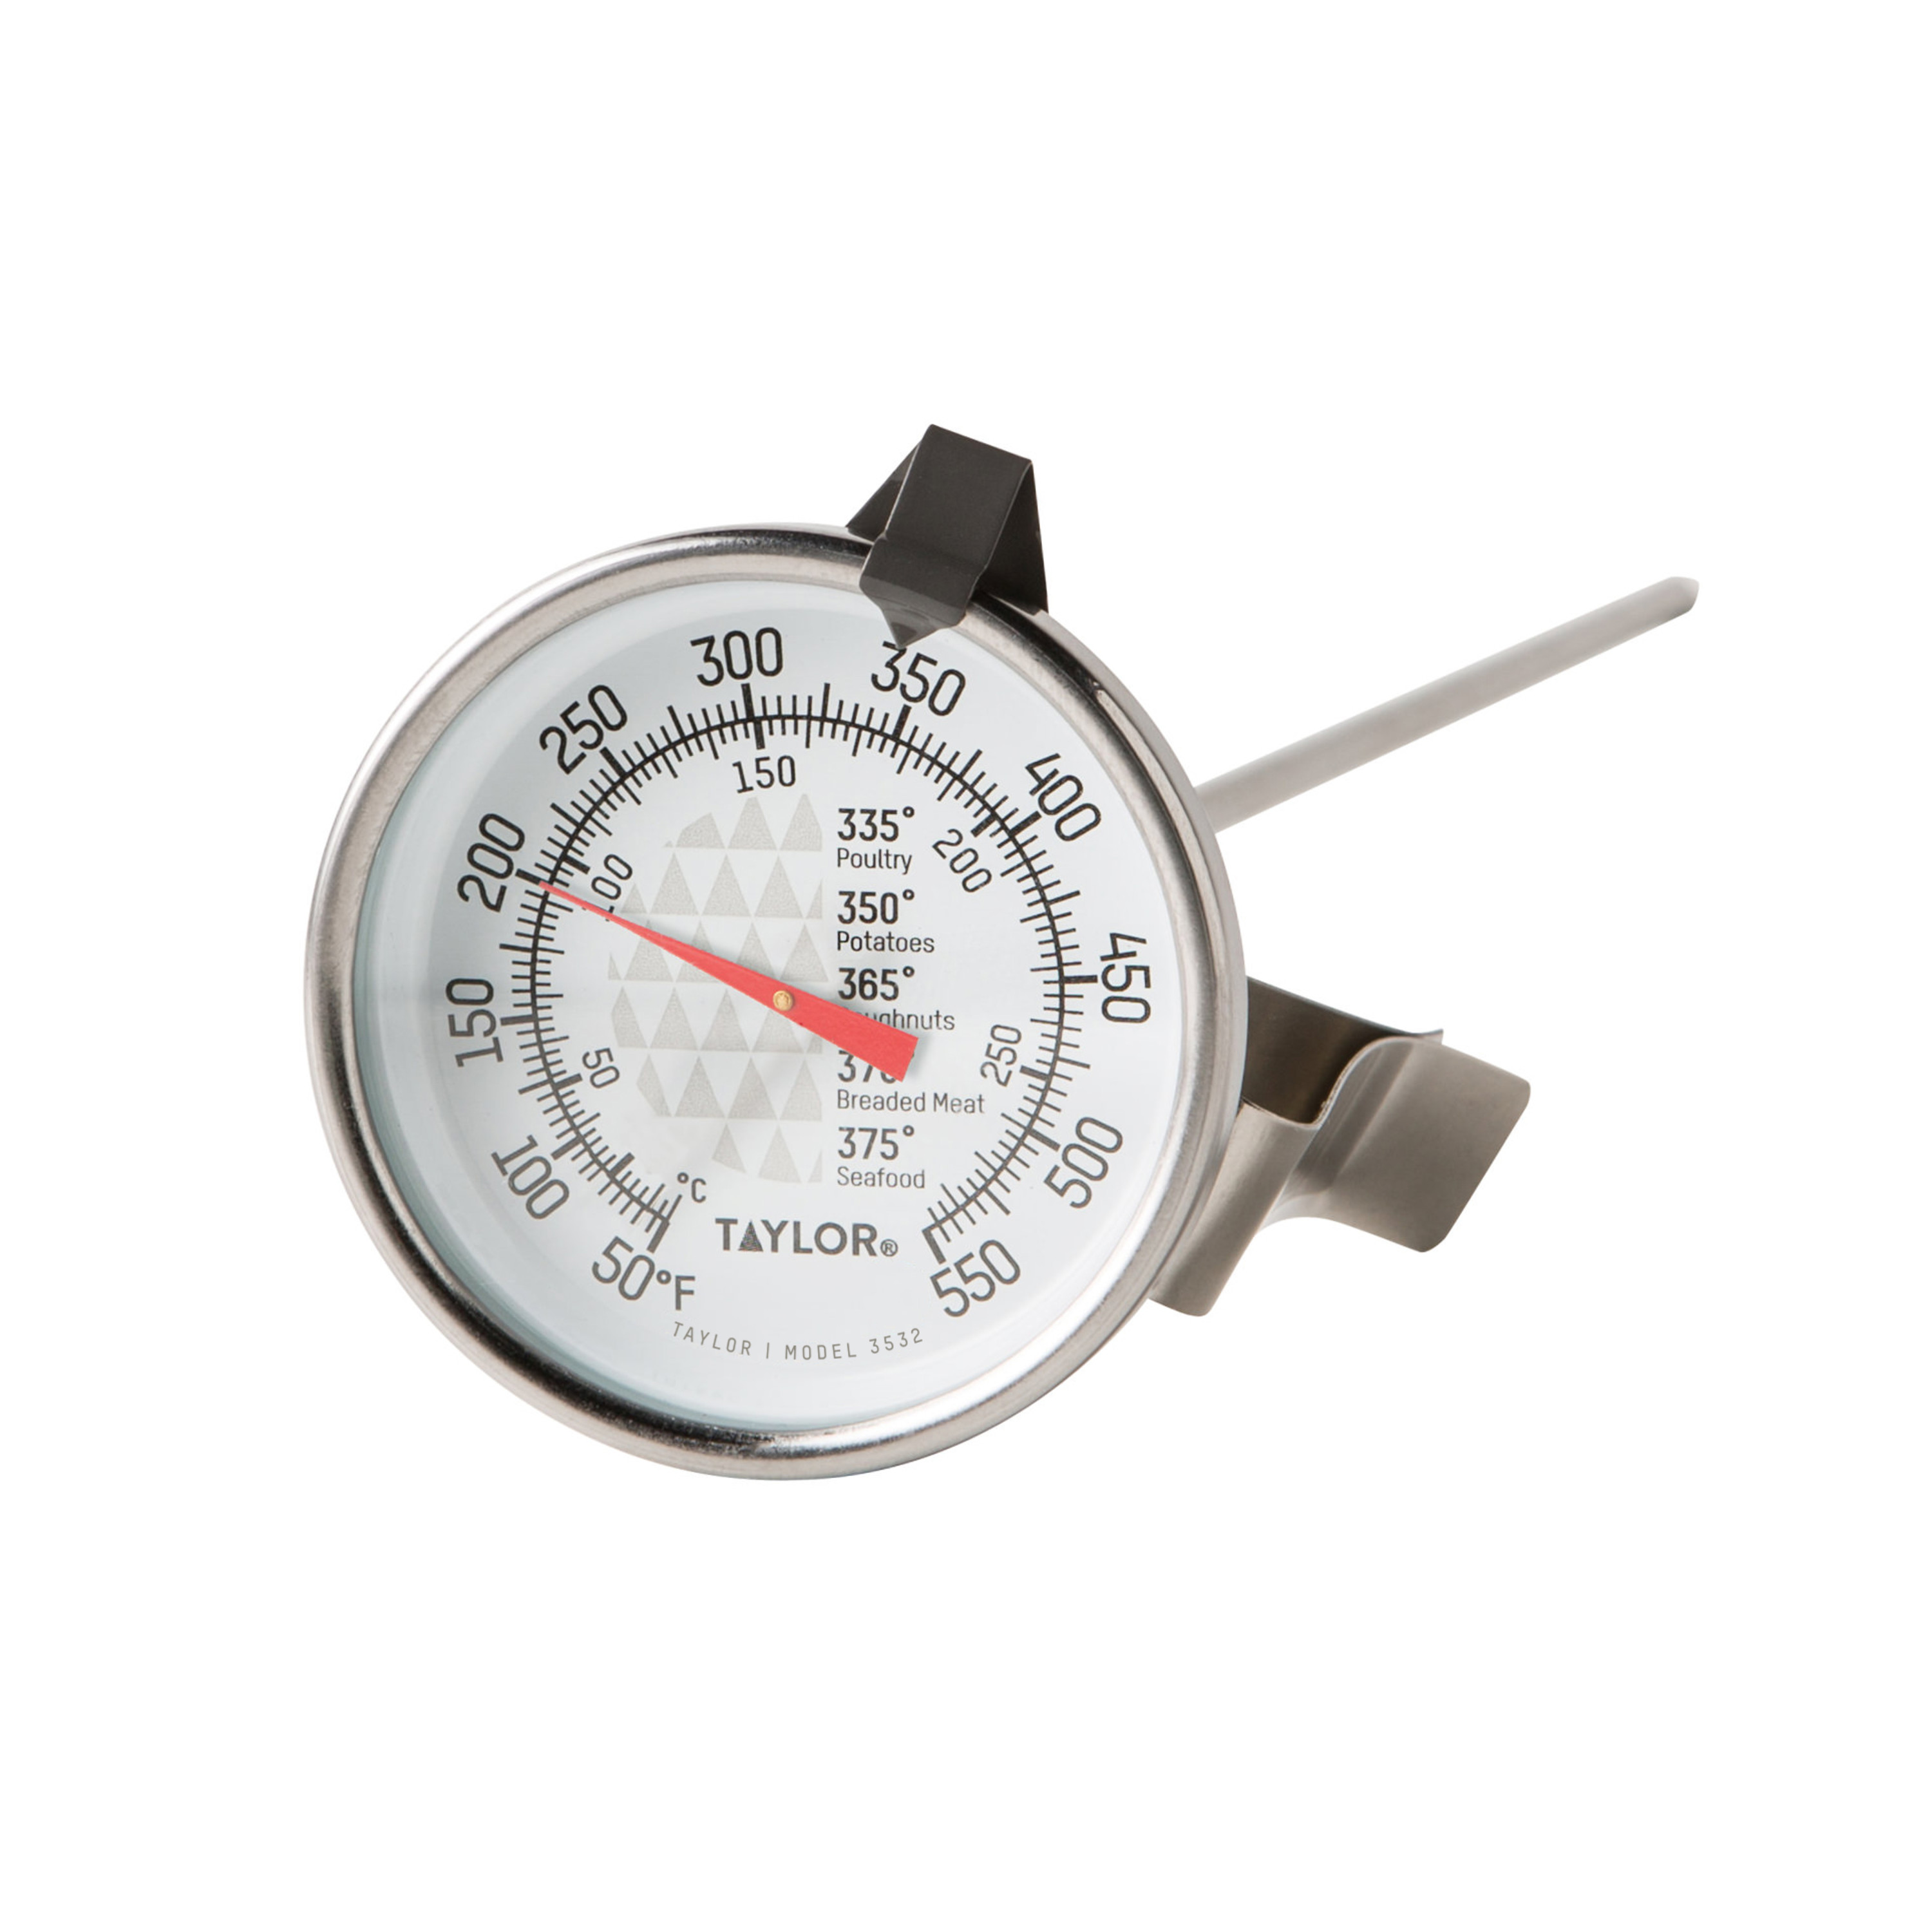 Taylor Candy and Deep Fry Analog Thermometer with Adjustable Pan Clip with 1.75-inch Dial - image 1 of 10